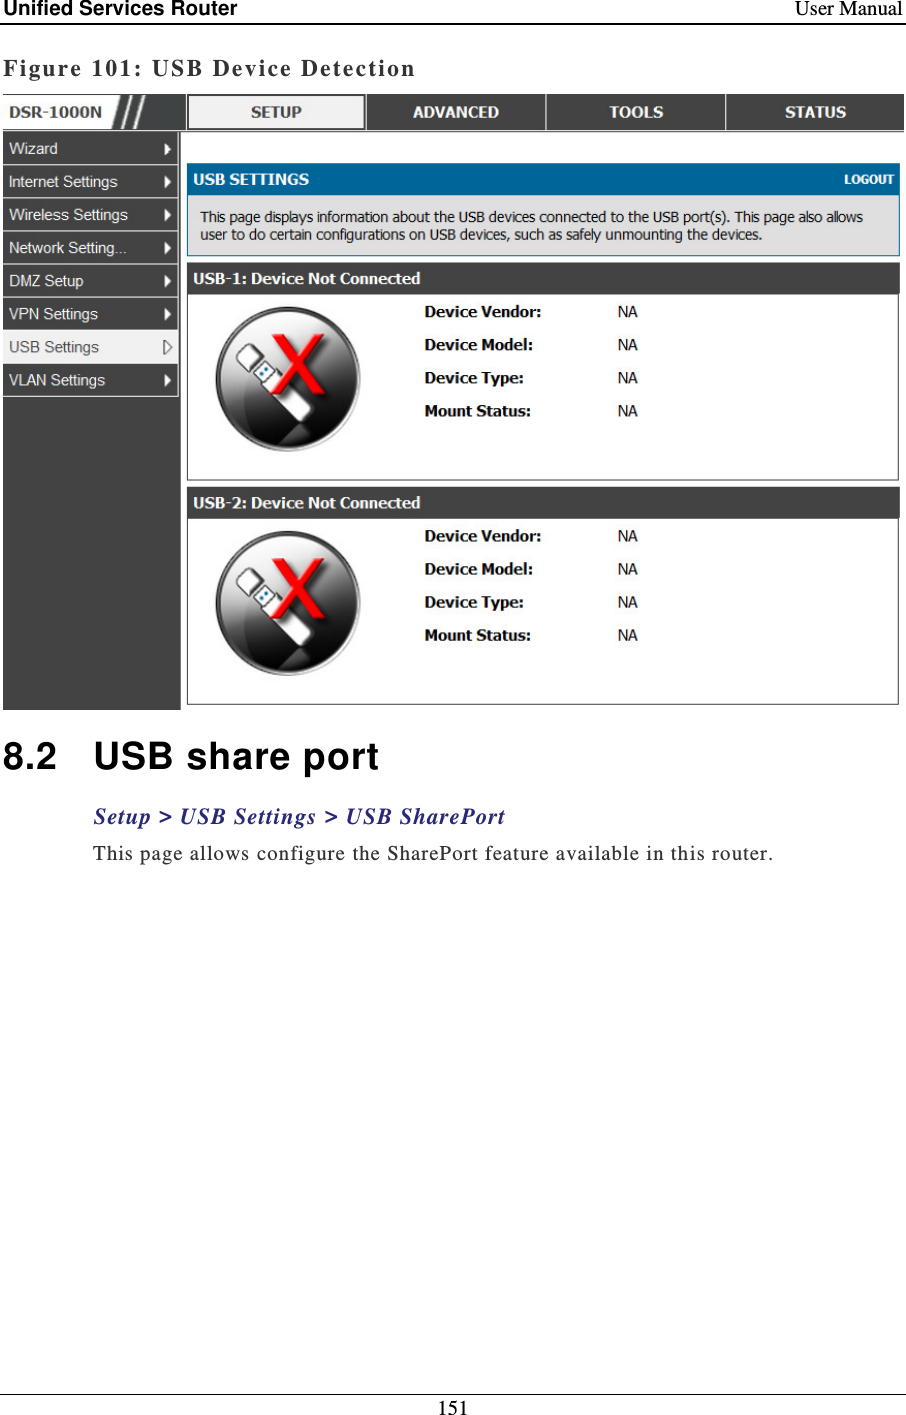 Unified Services Router    User Manual 151  Figure 101:  USB Device Detectio n   8.2  USB share port Setup &gt; USB Settings &gt; USB SharePort This page allows configure the SharePort feature available in this router.  